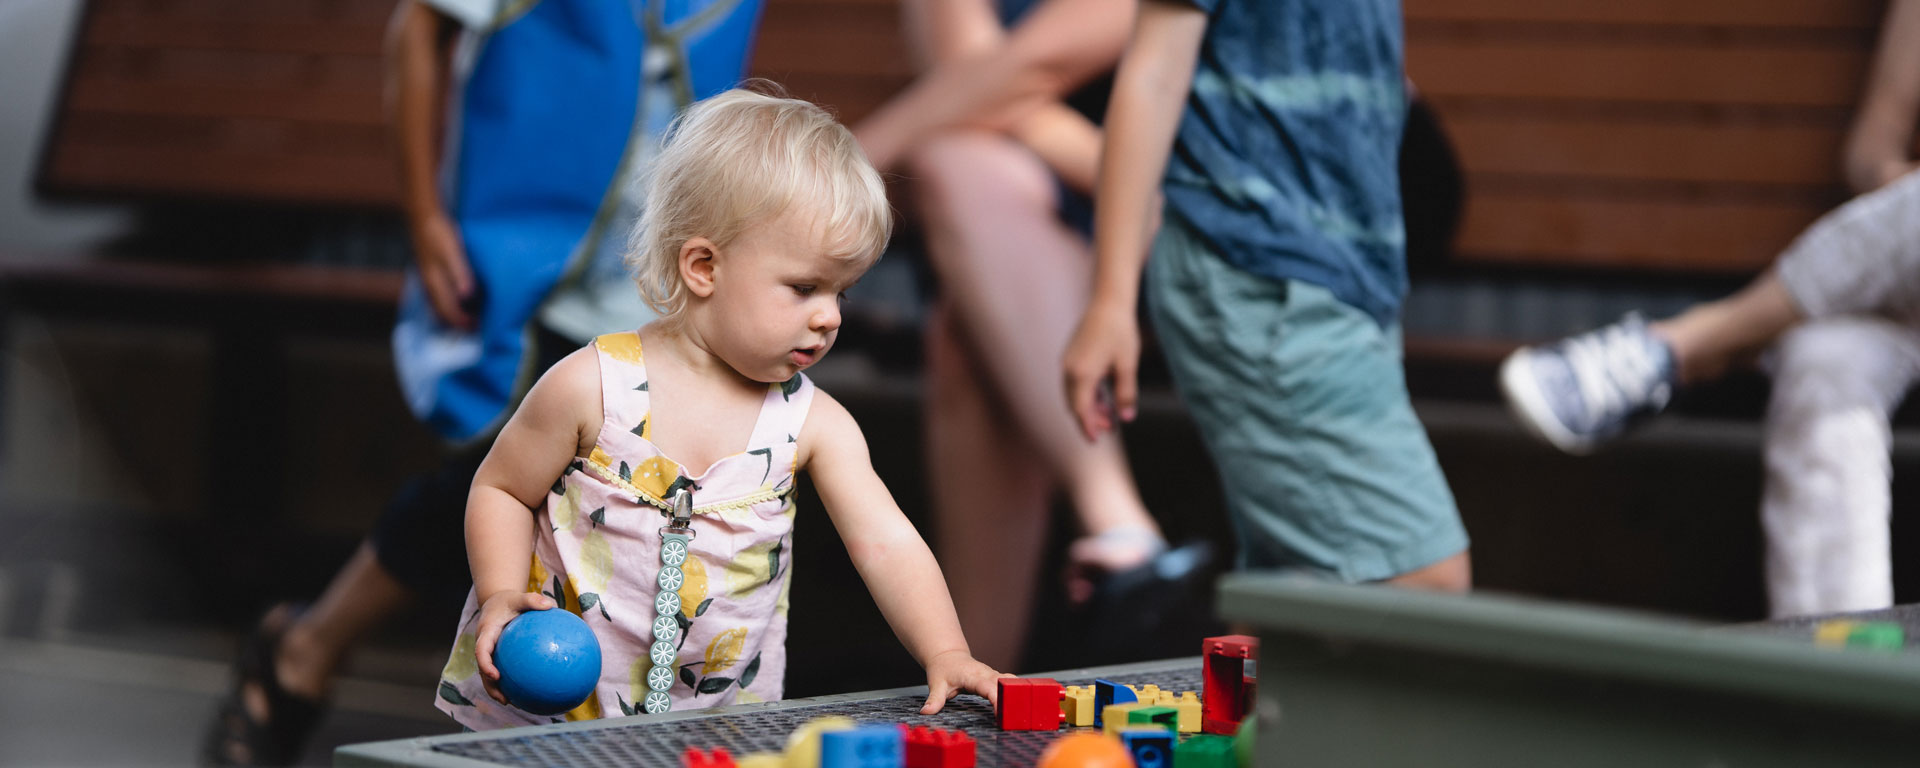 Decorative image of a very young child interacting with blocks and water